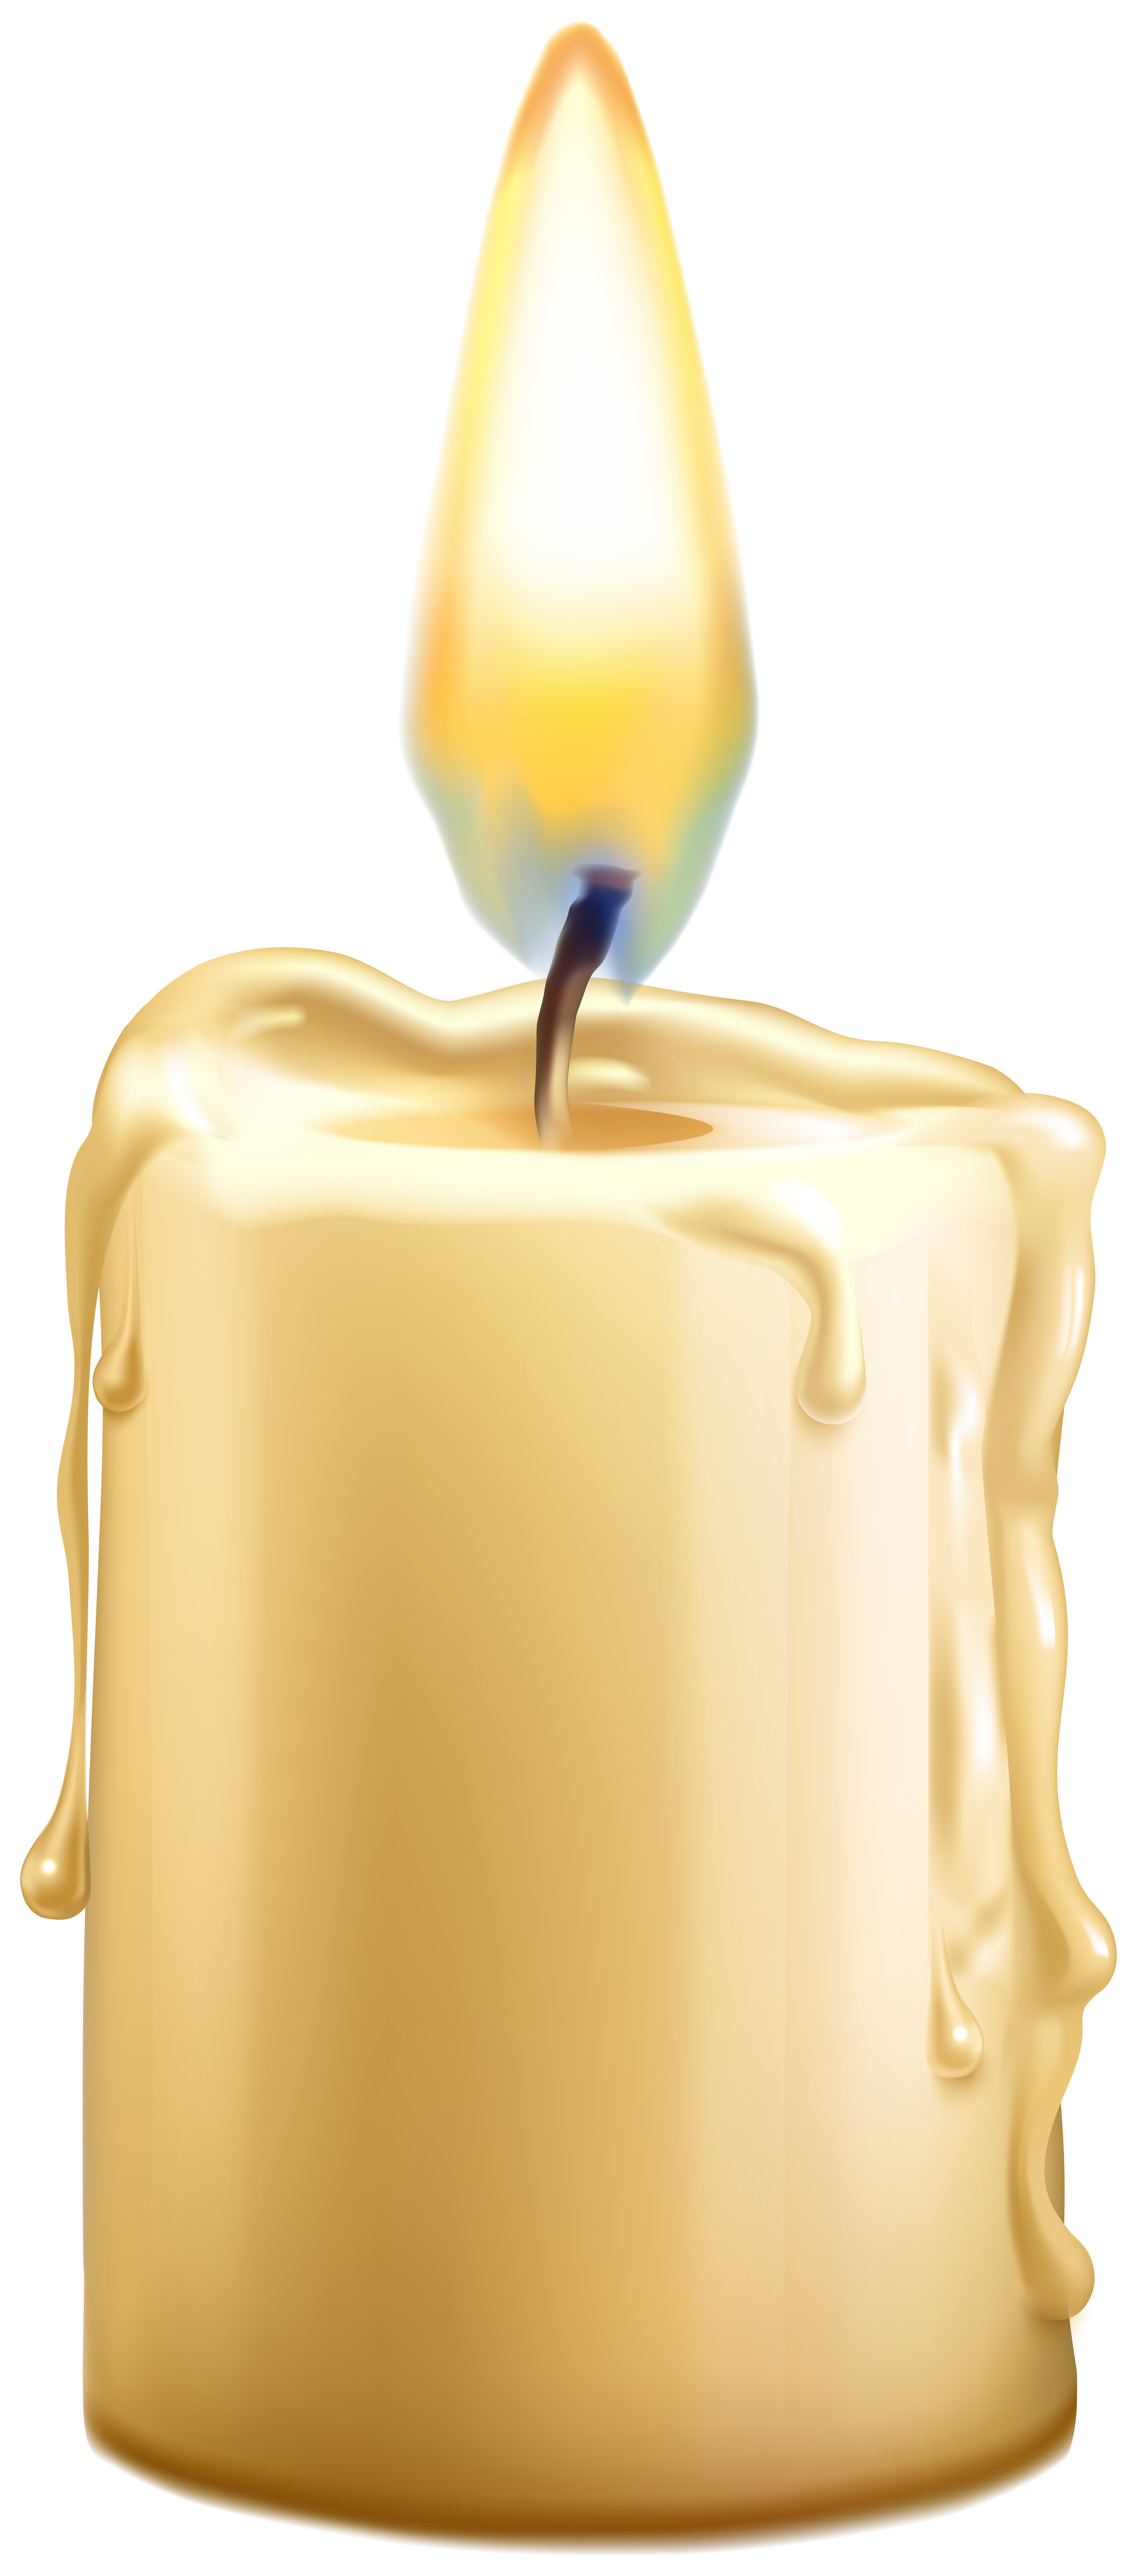 Lighted Candle Transparent Image​-Quality Image and Transparent PNG Free Clipart